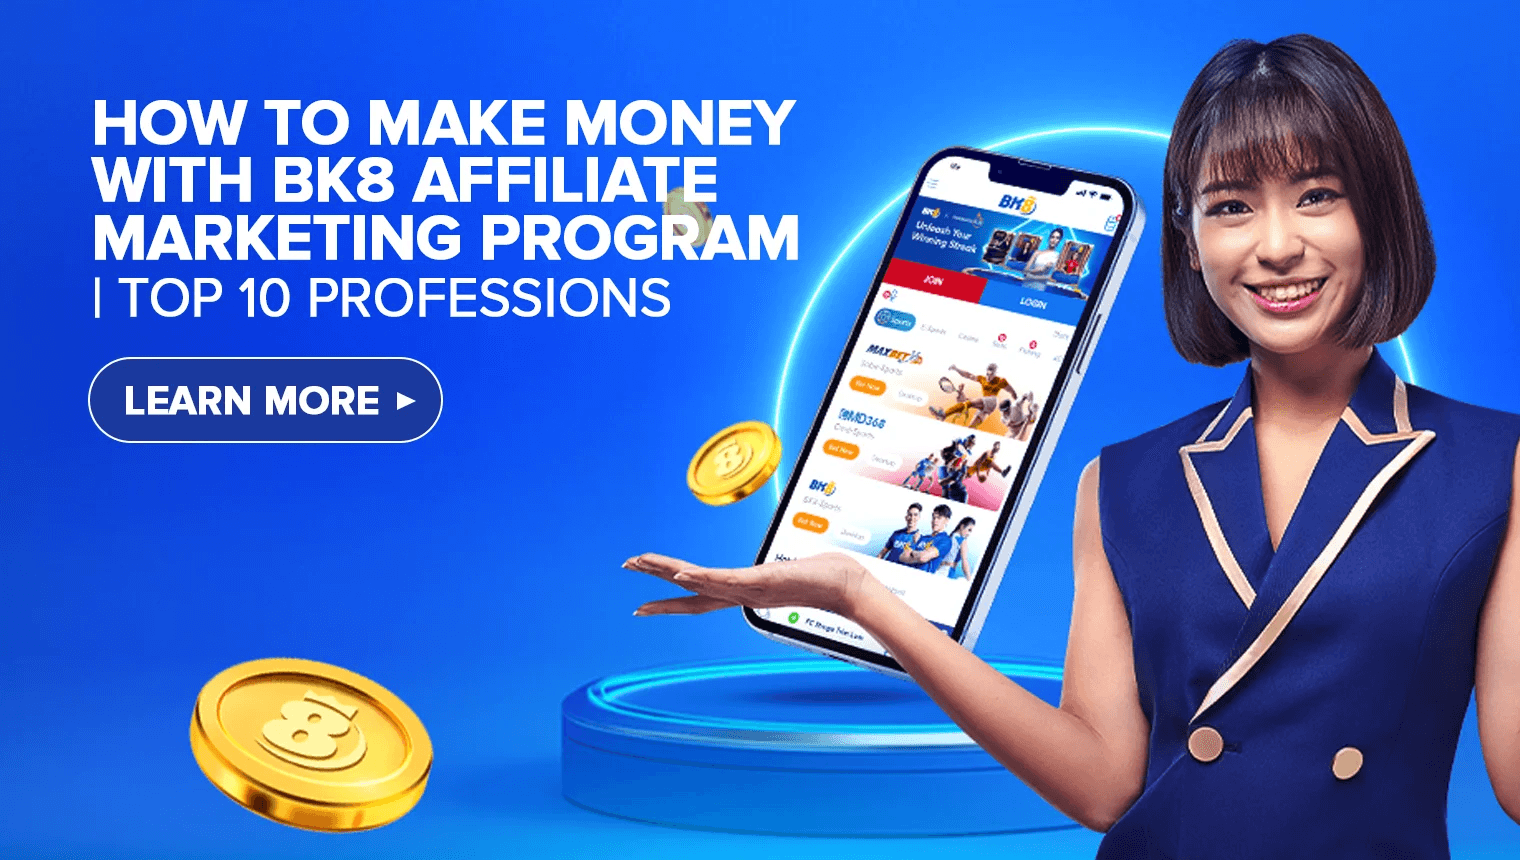 You are currently viewing How to Make Money With BK8 Affiliate Marketing Program | Top 9 Professions